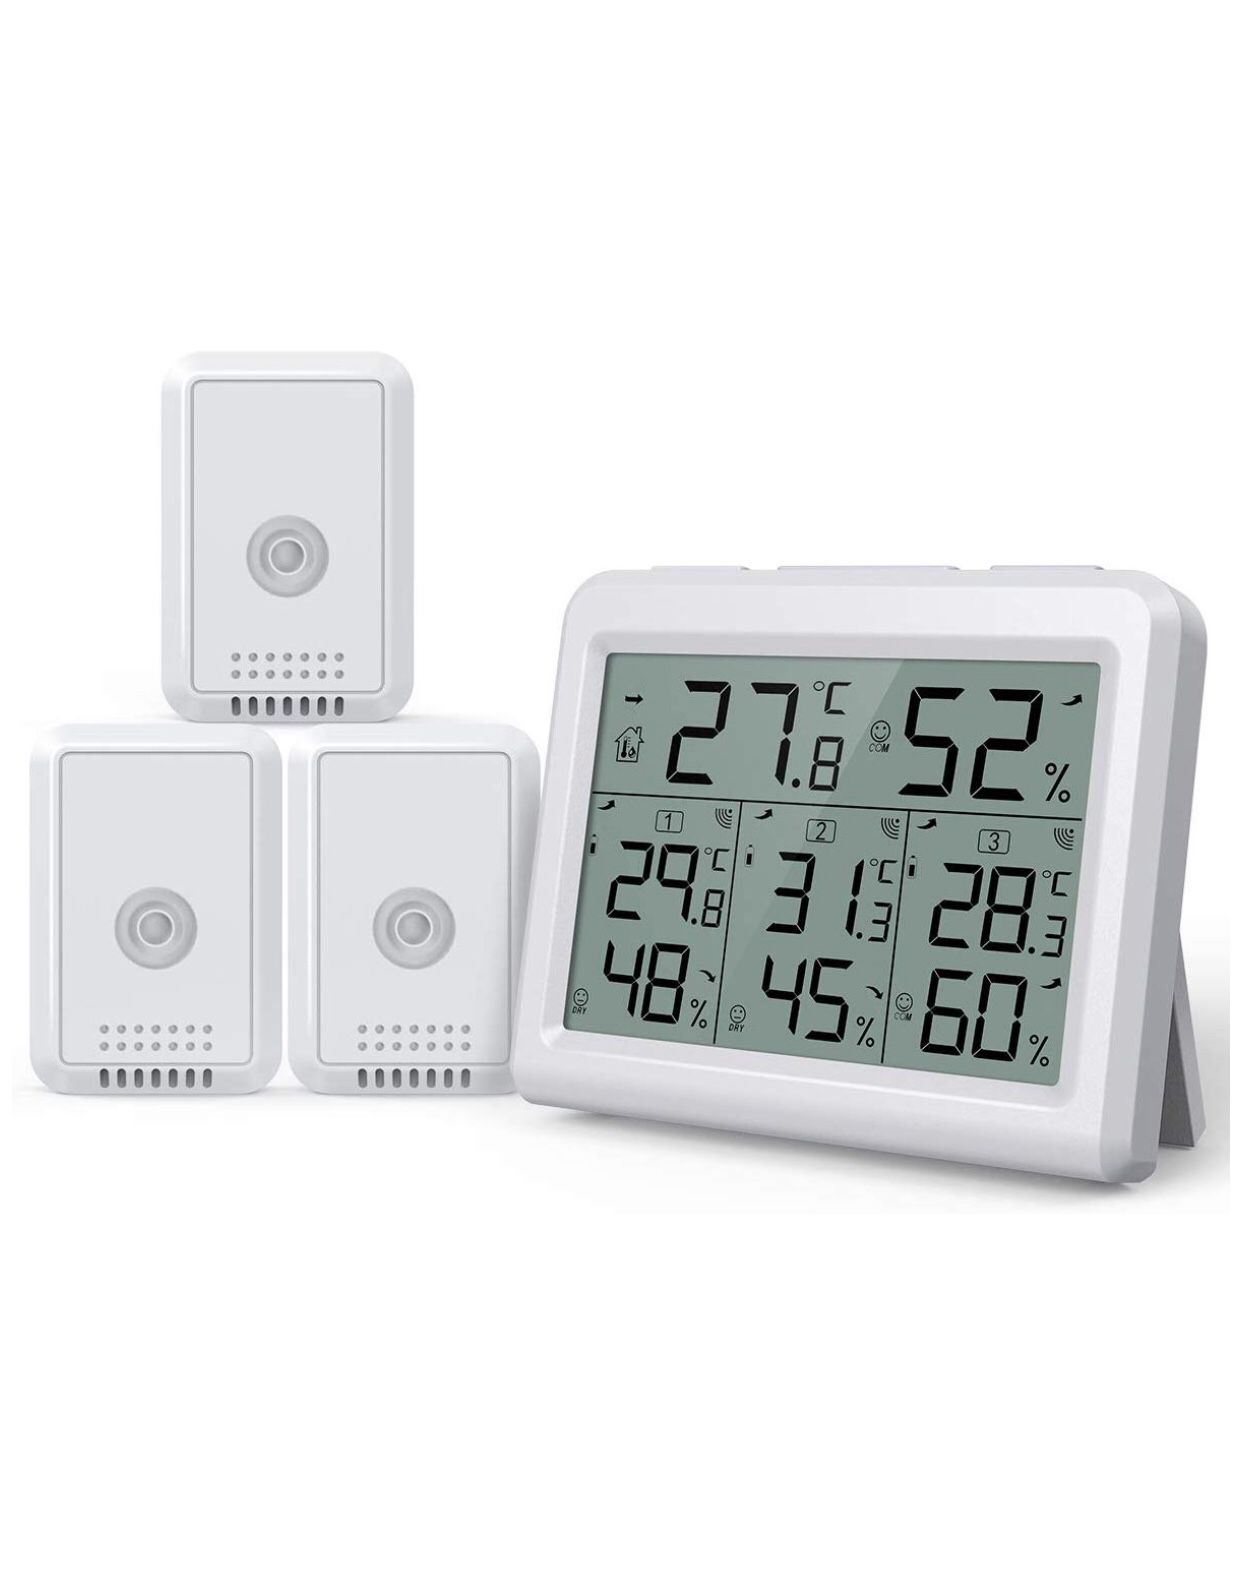 Indoor Outdoor Thermometer, 3 Channels Digital Hygrometer Thermometer with 3 Sensor, Humidity Monitor Wireless with LCD Display, Room Thermometer an